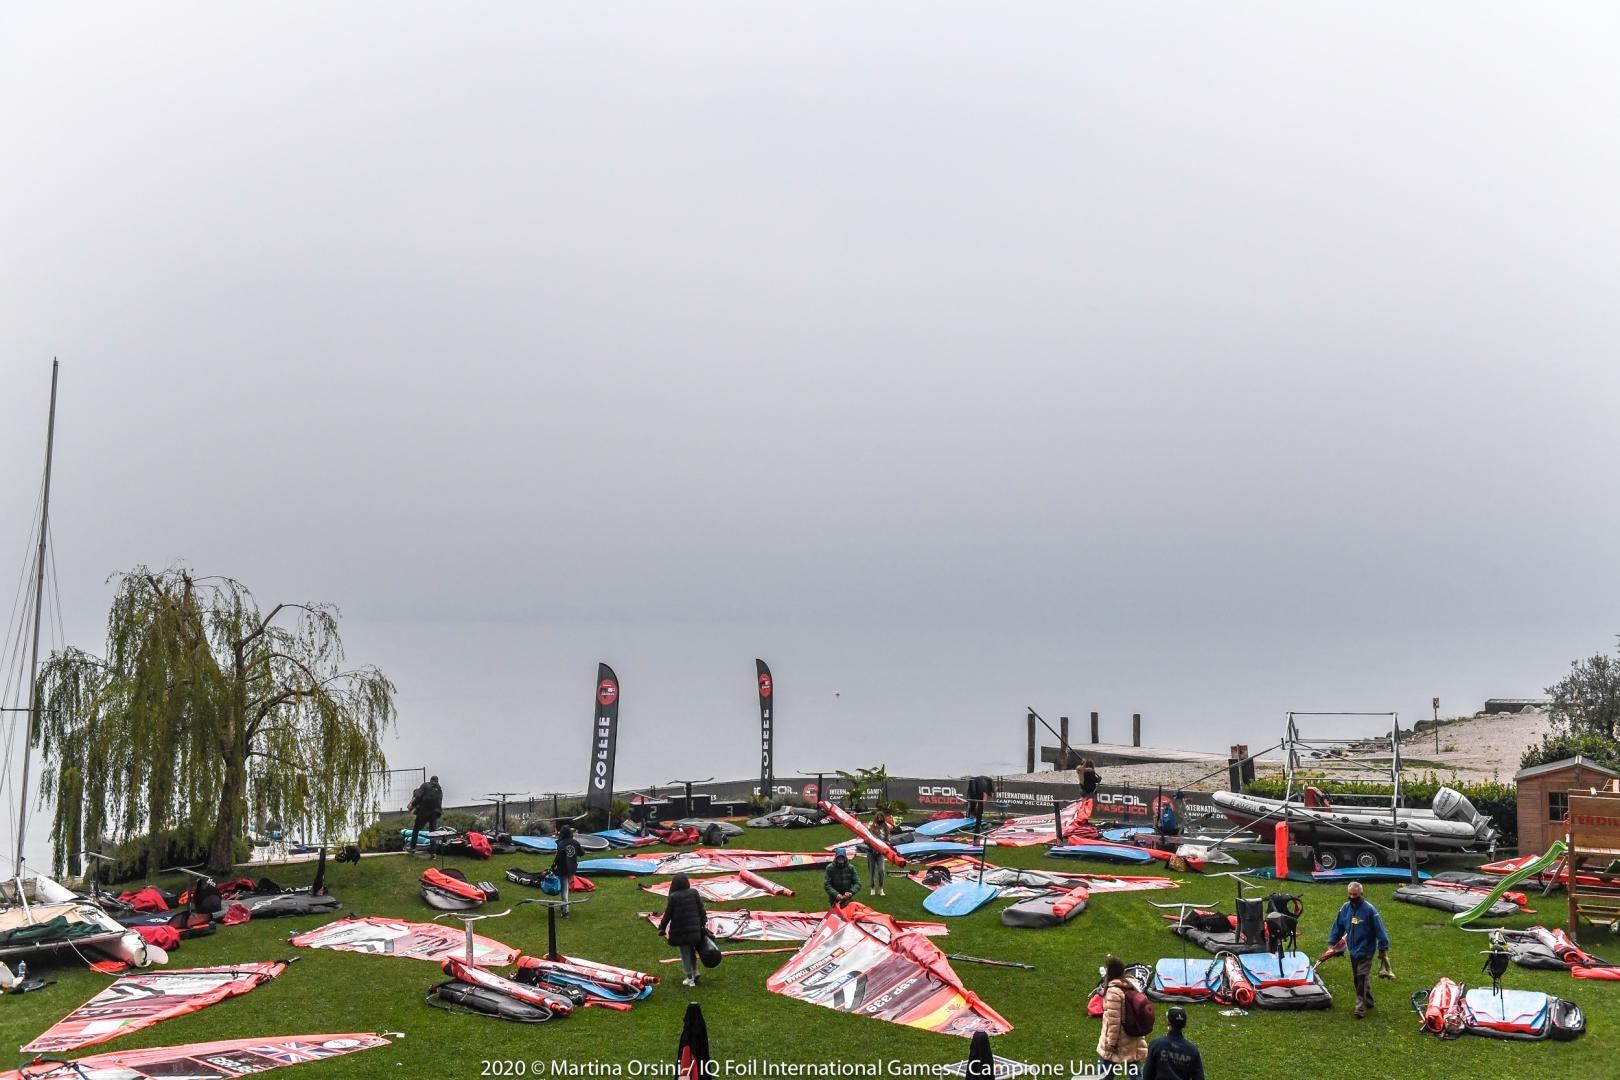 Day four of the iQFoil International Games - No racing today